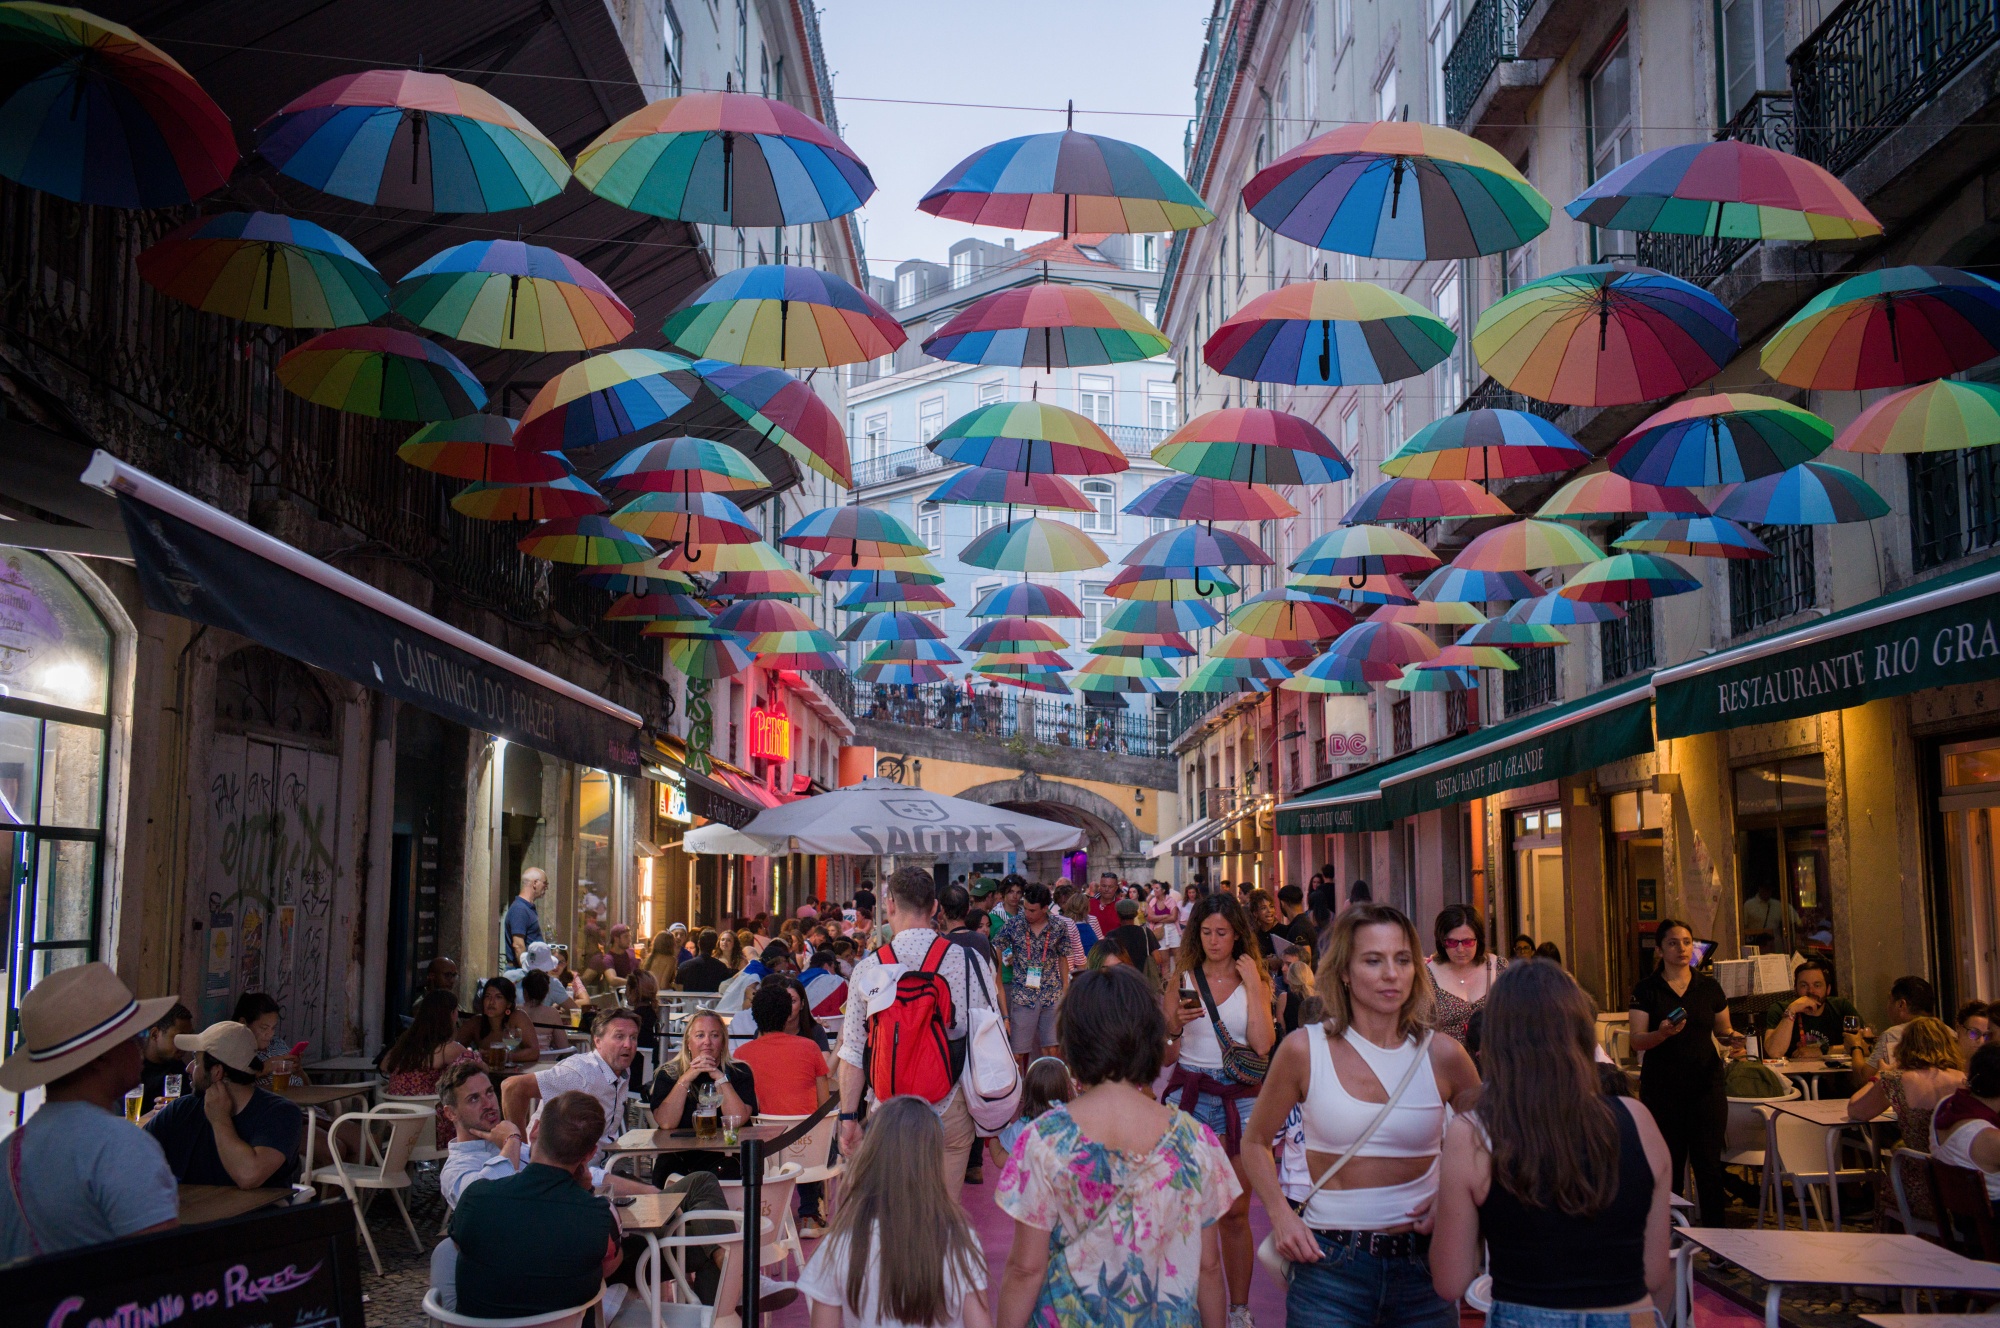 Tourists pass diners on Pink Street in the Cais do Sodre district of Lisbon, Portugal.